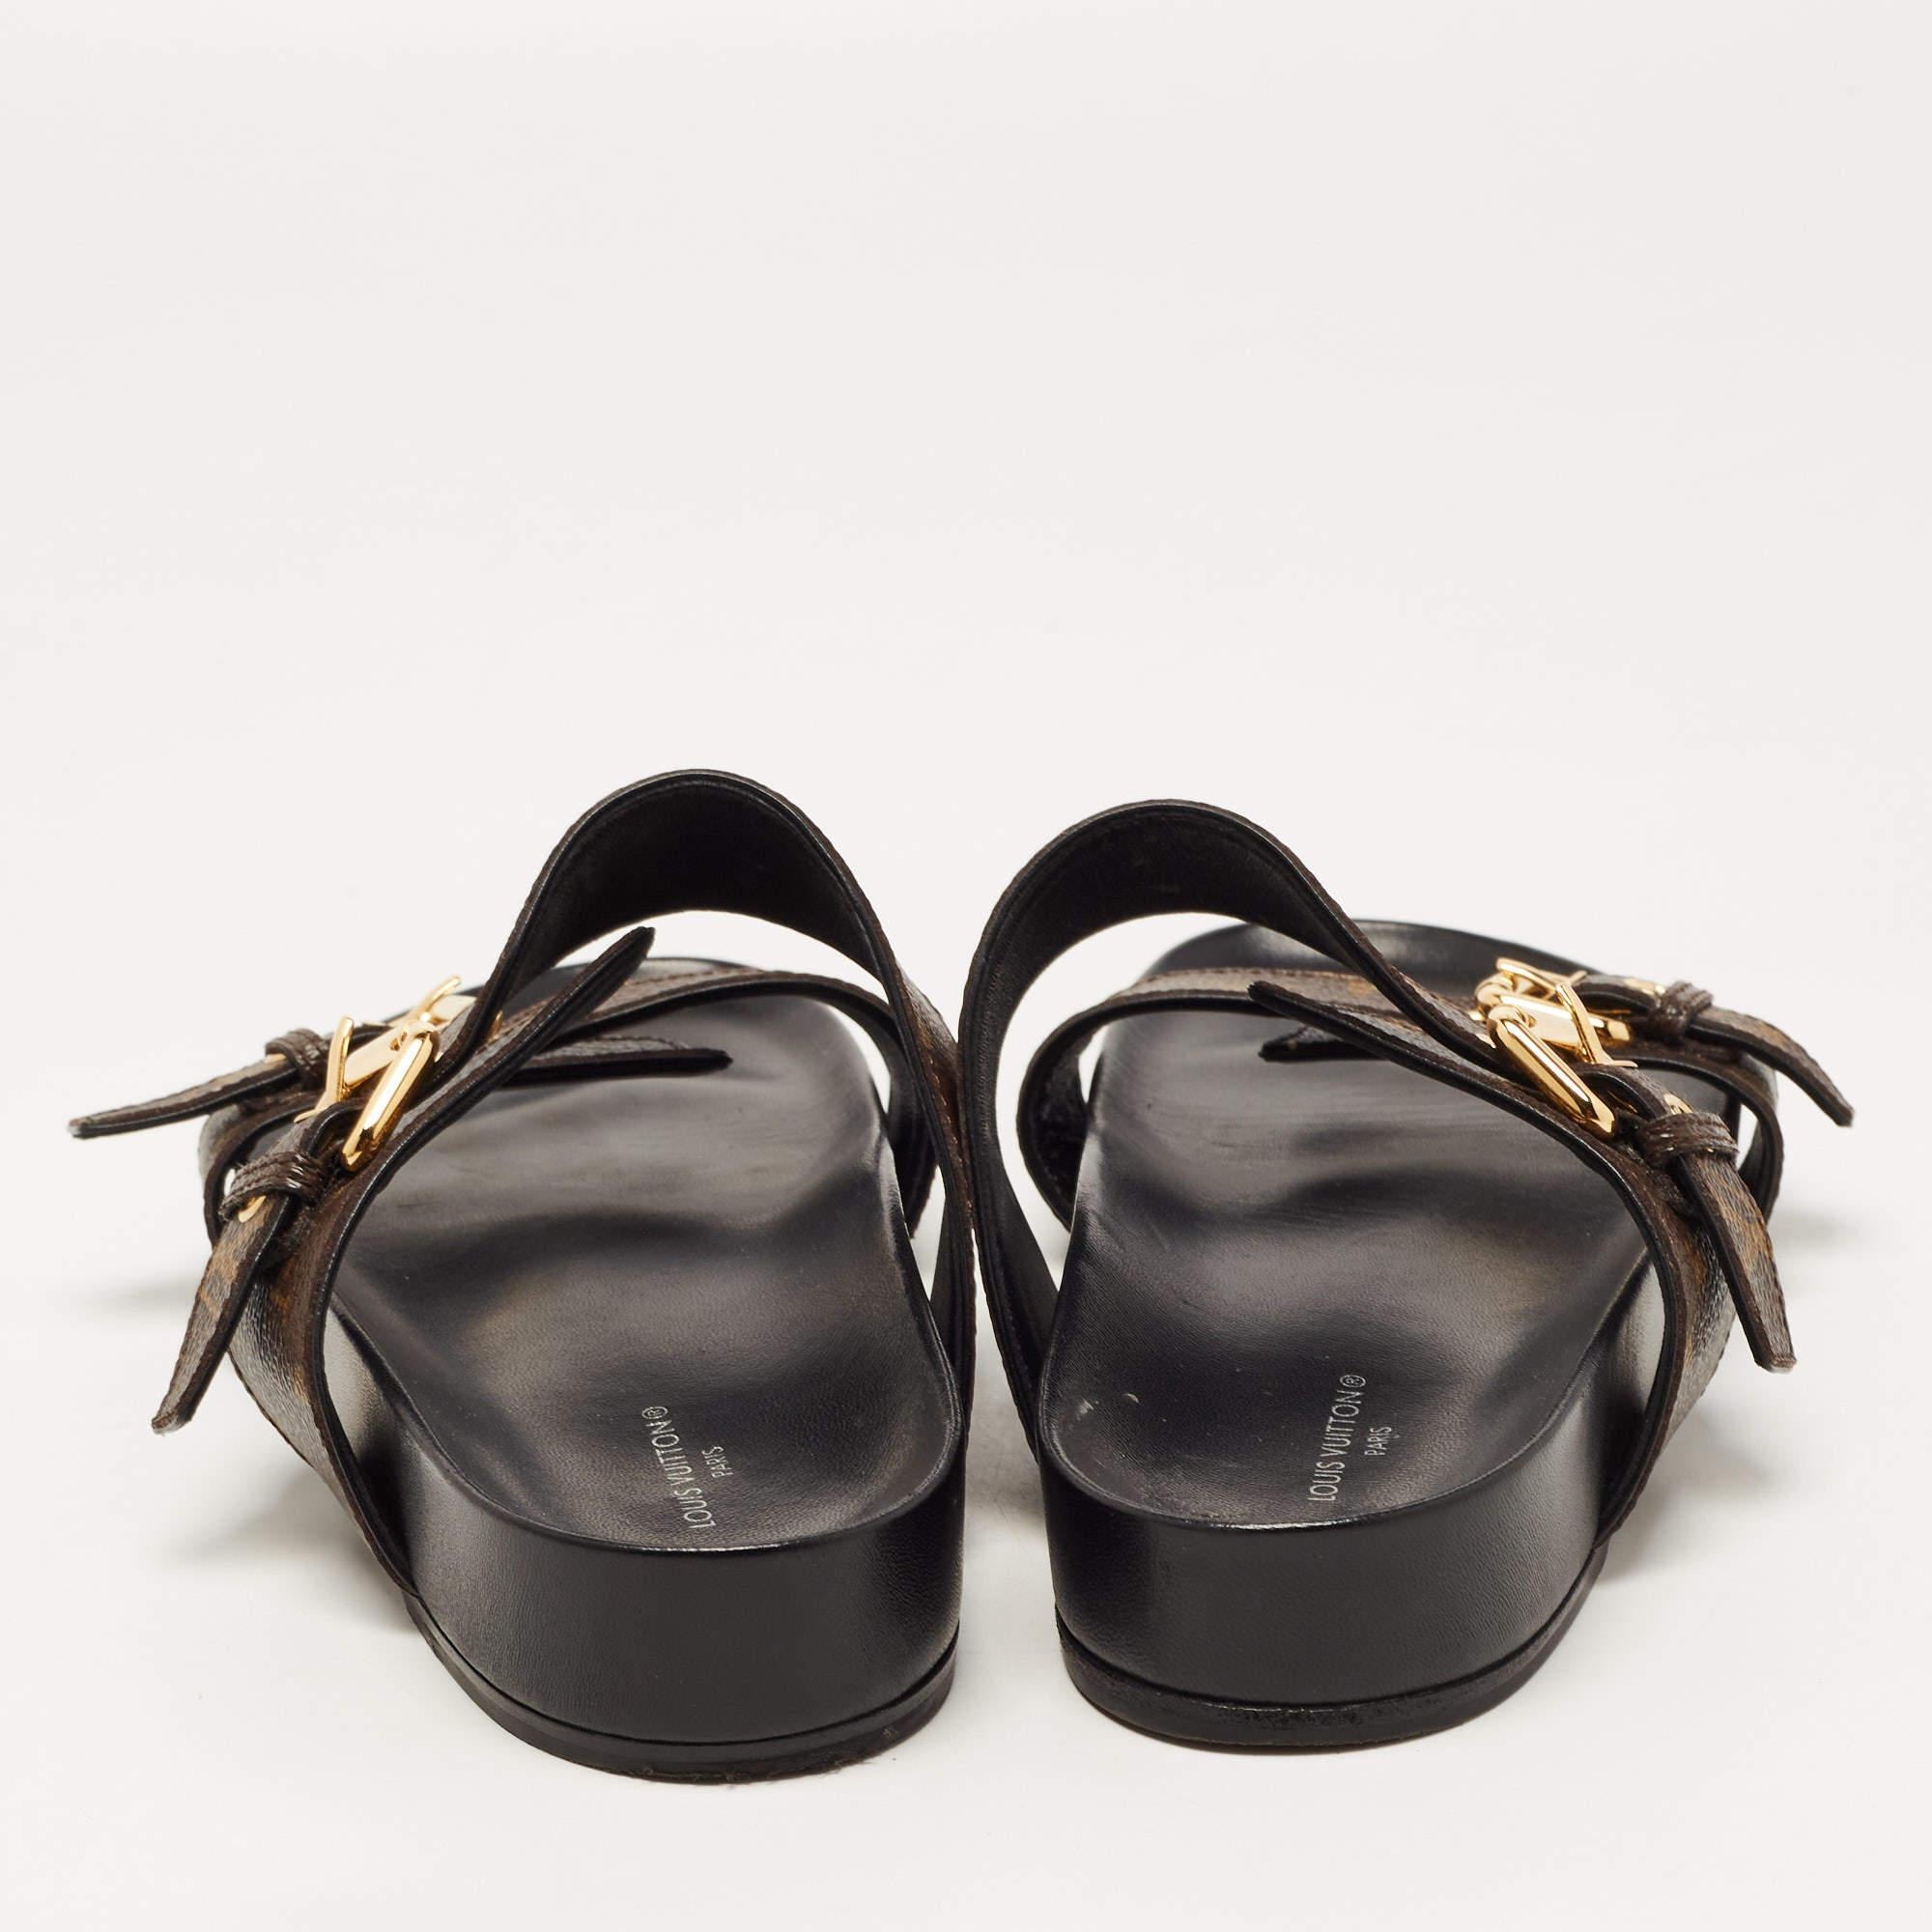 Louis Vuitton Bom Dia Sandals - For Sale on 1stDibs